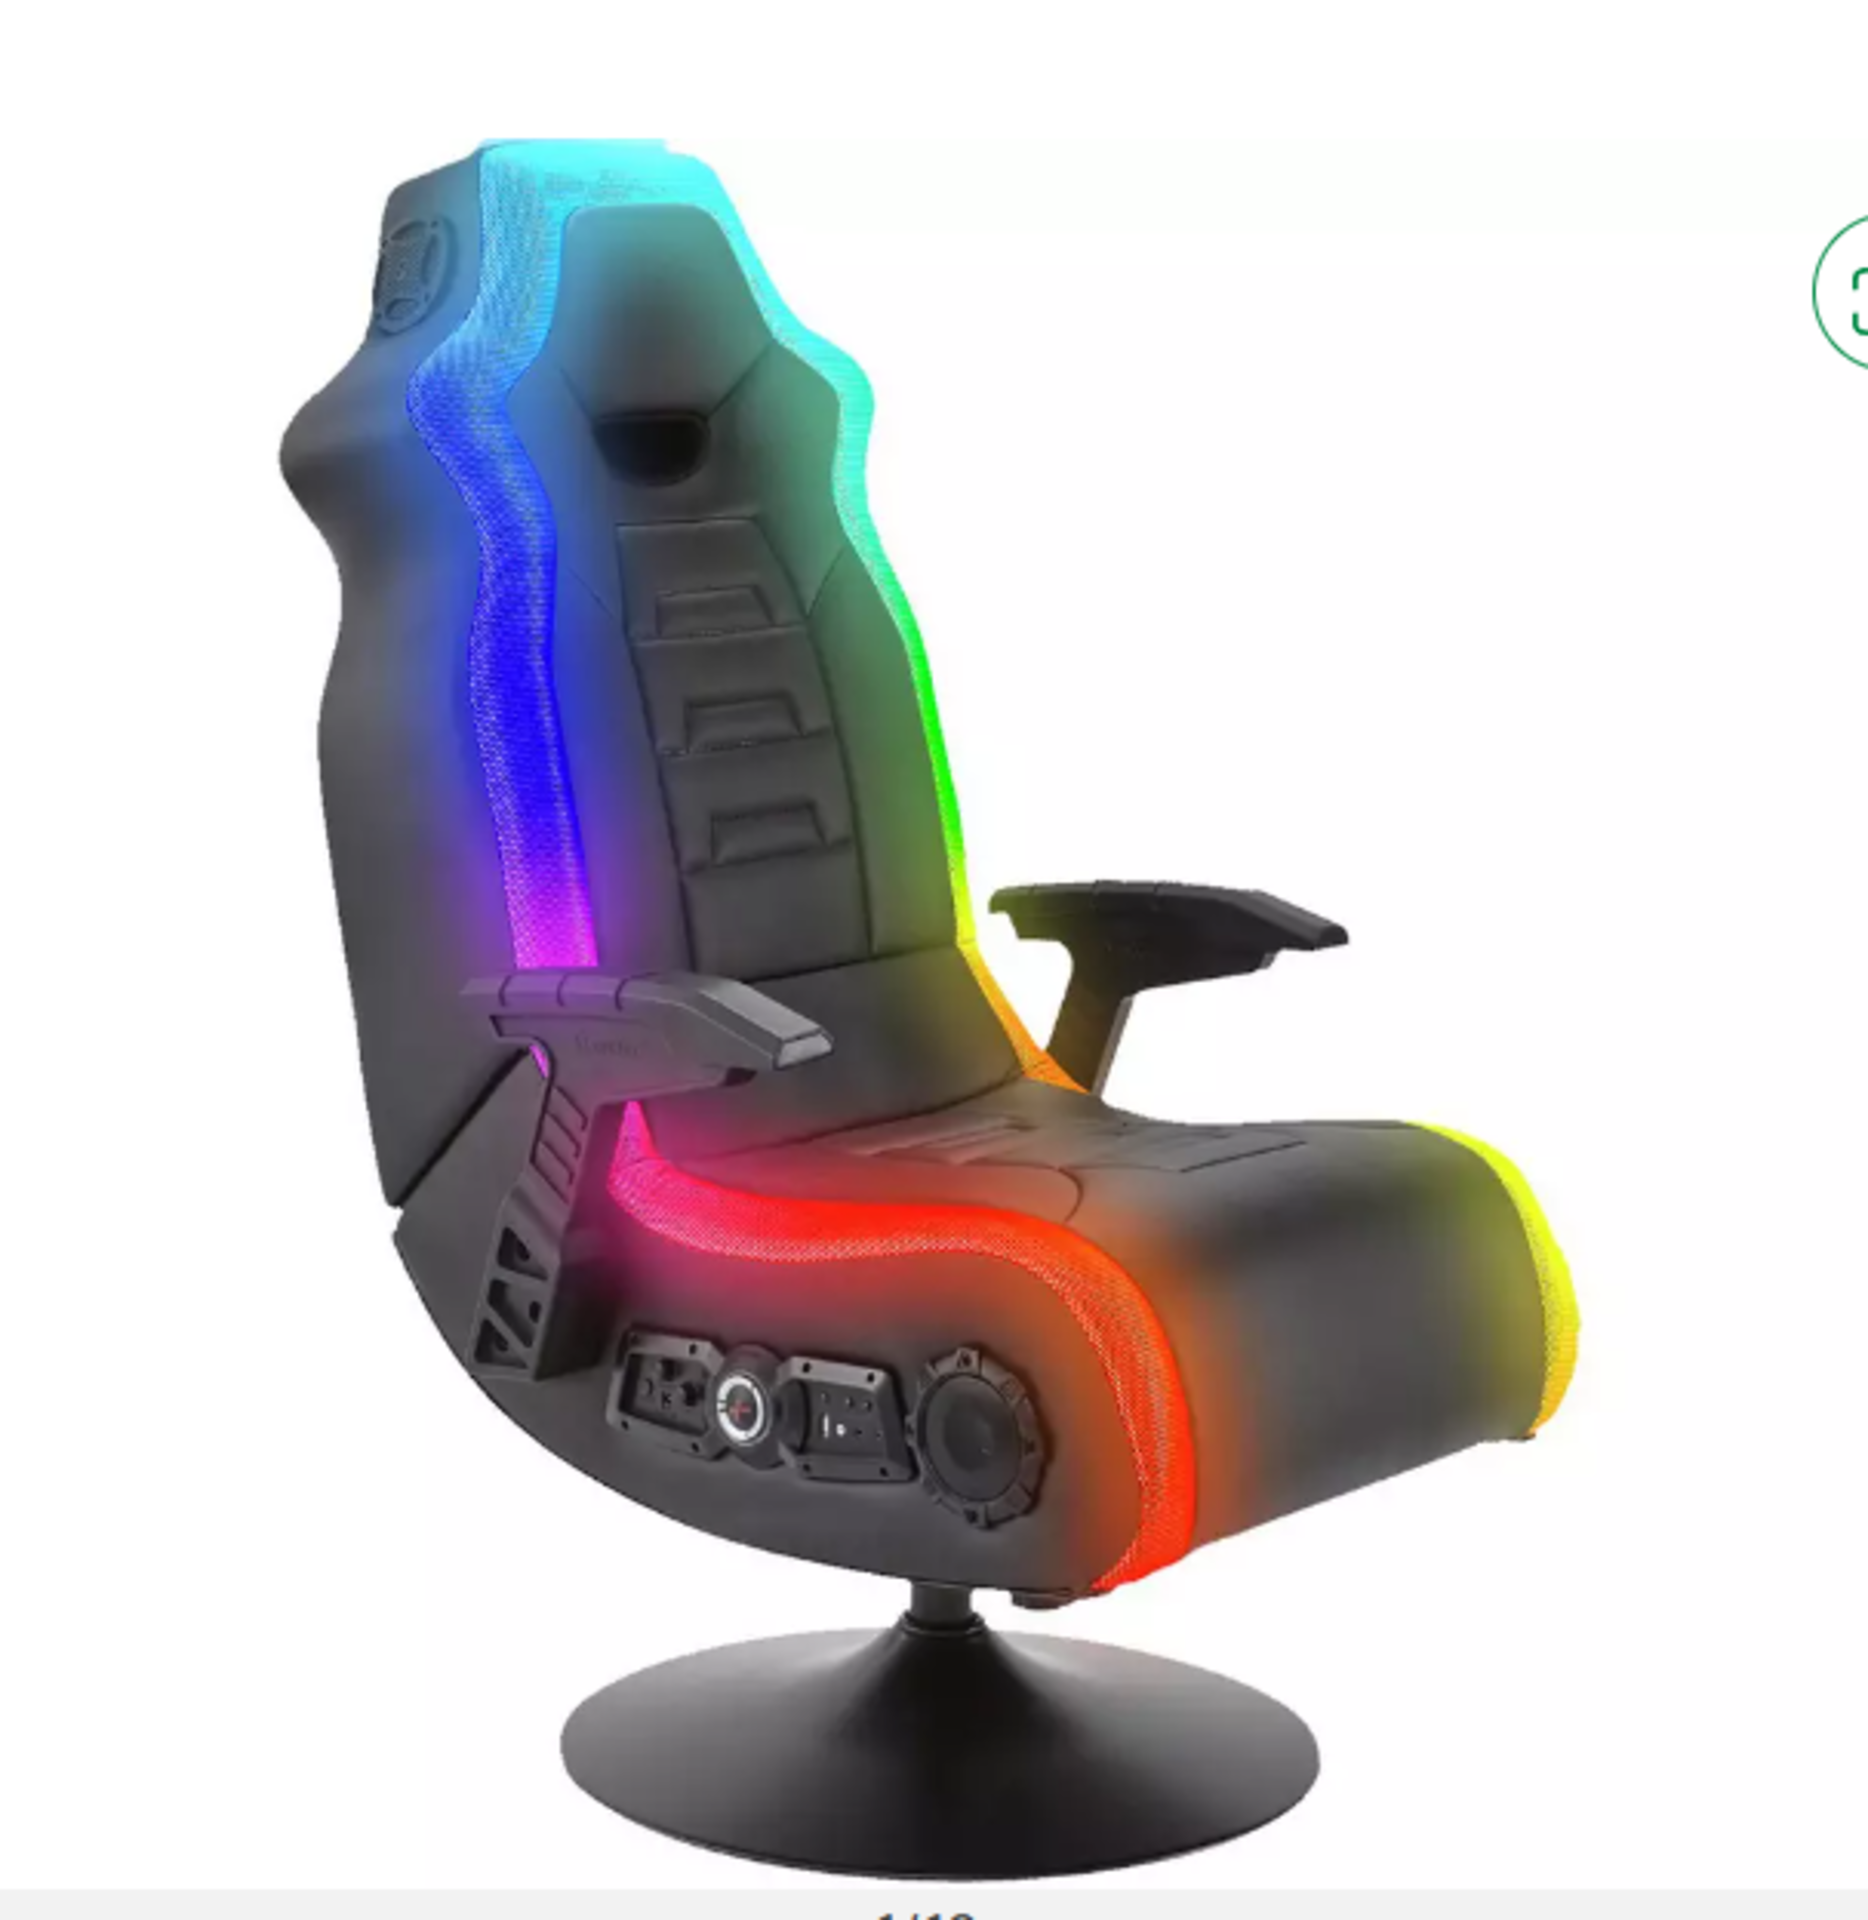 X Rocker Neo Storm 4.1 Audio Neo Motion LED Gaming Chair. RRP £279.00. The X Rocker Neo Storm 4.1 is